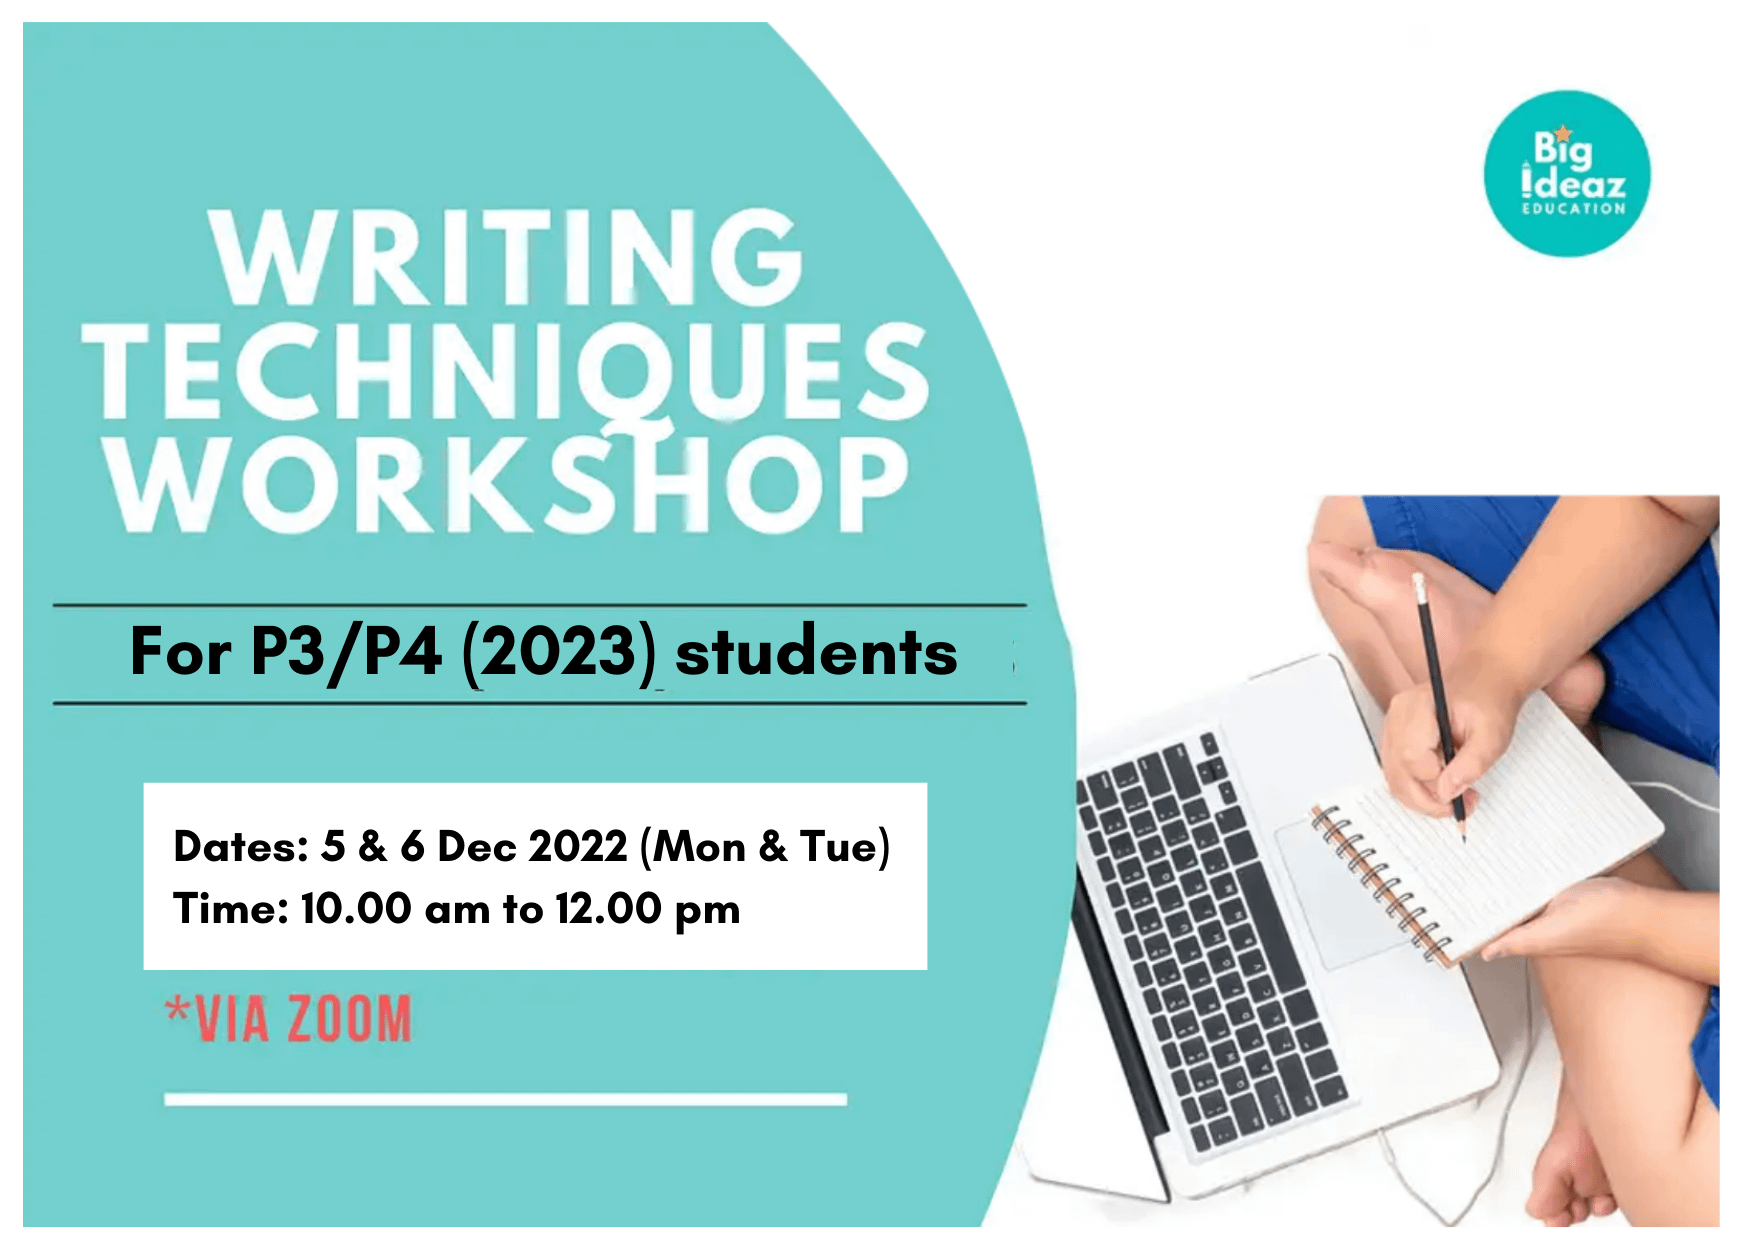 Writing Techniques Workshop for P3/P4 (2023) Students